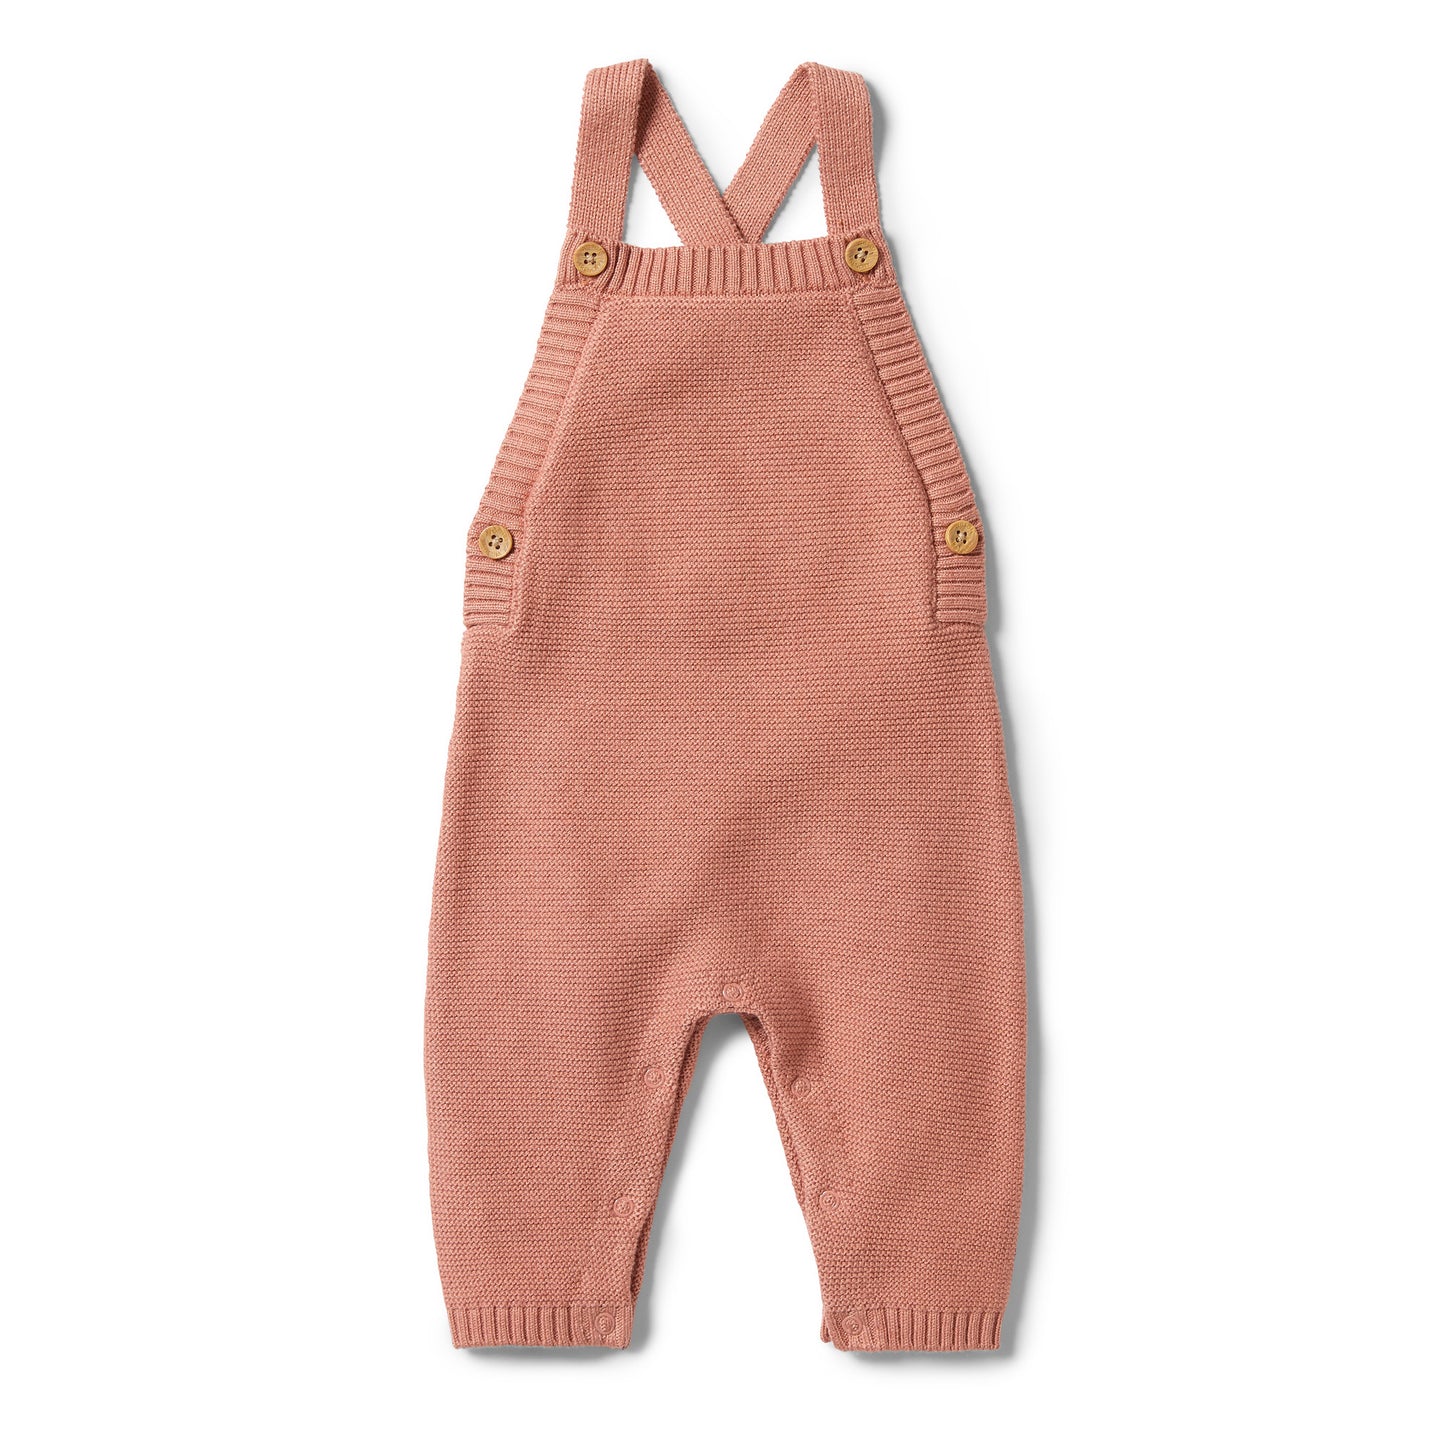 WILSON & FRENCHY - Knitted Overall | Cream Tan